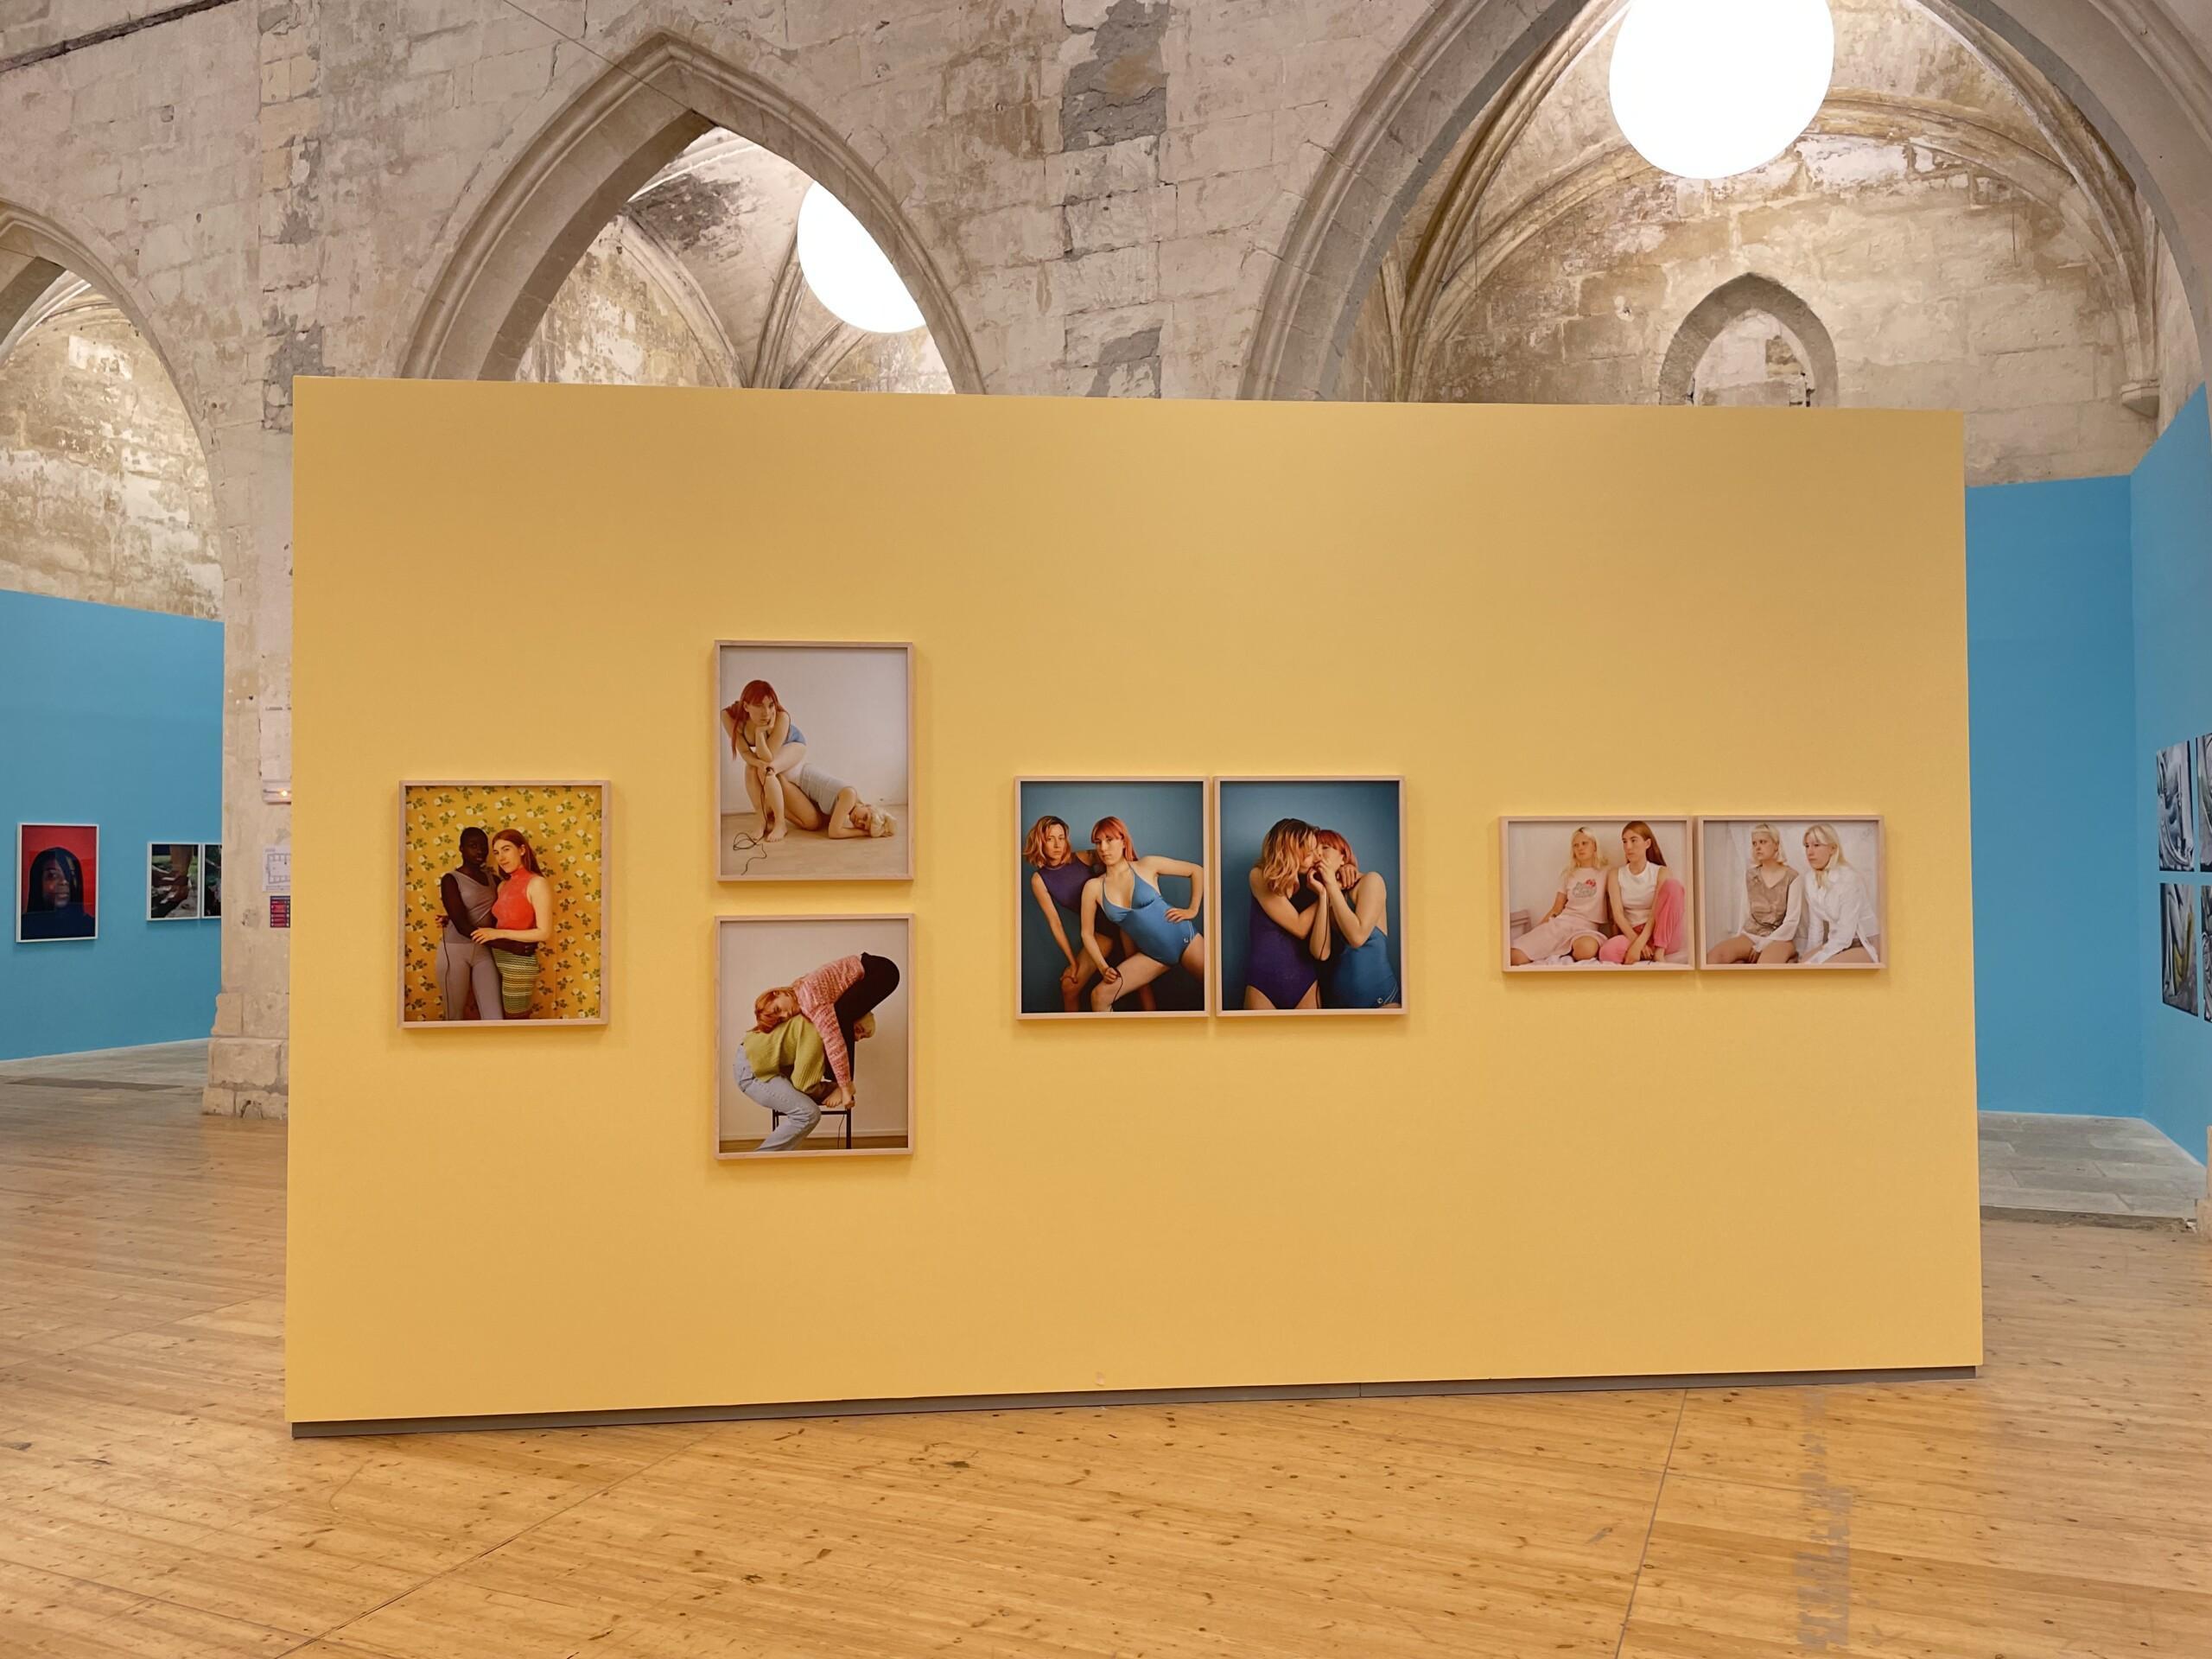 A yellow installation wall in the middle of a brightly lighted exhibition space. There are seven framed multi-colored photograph works by Emma Sarpaniemi installed on the wall.